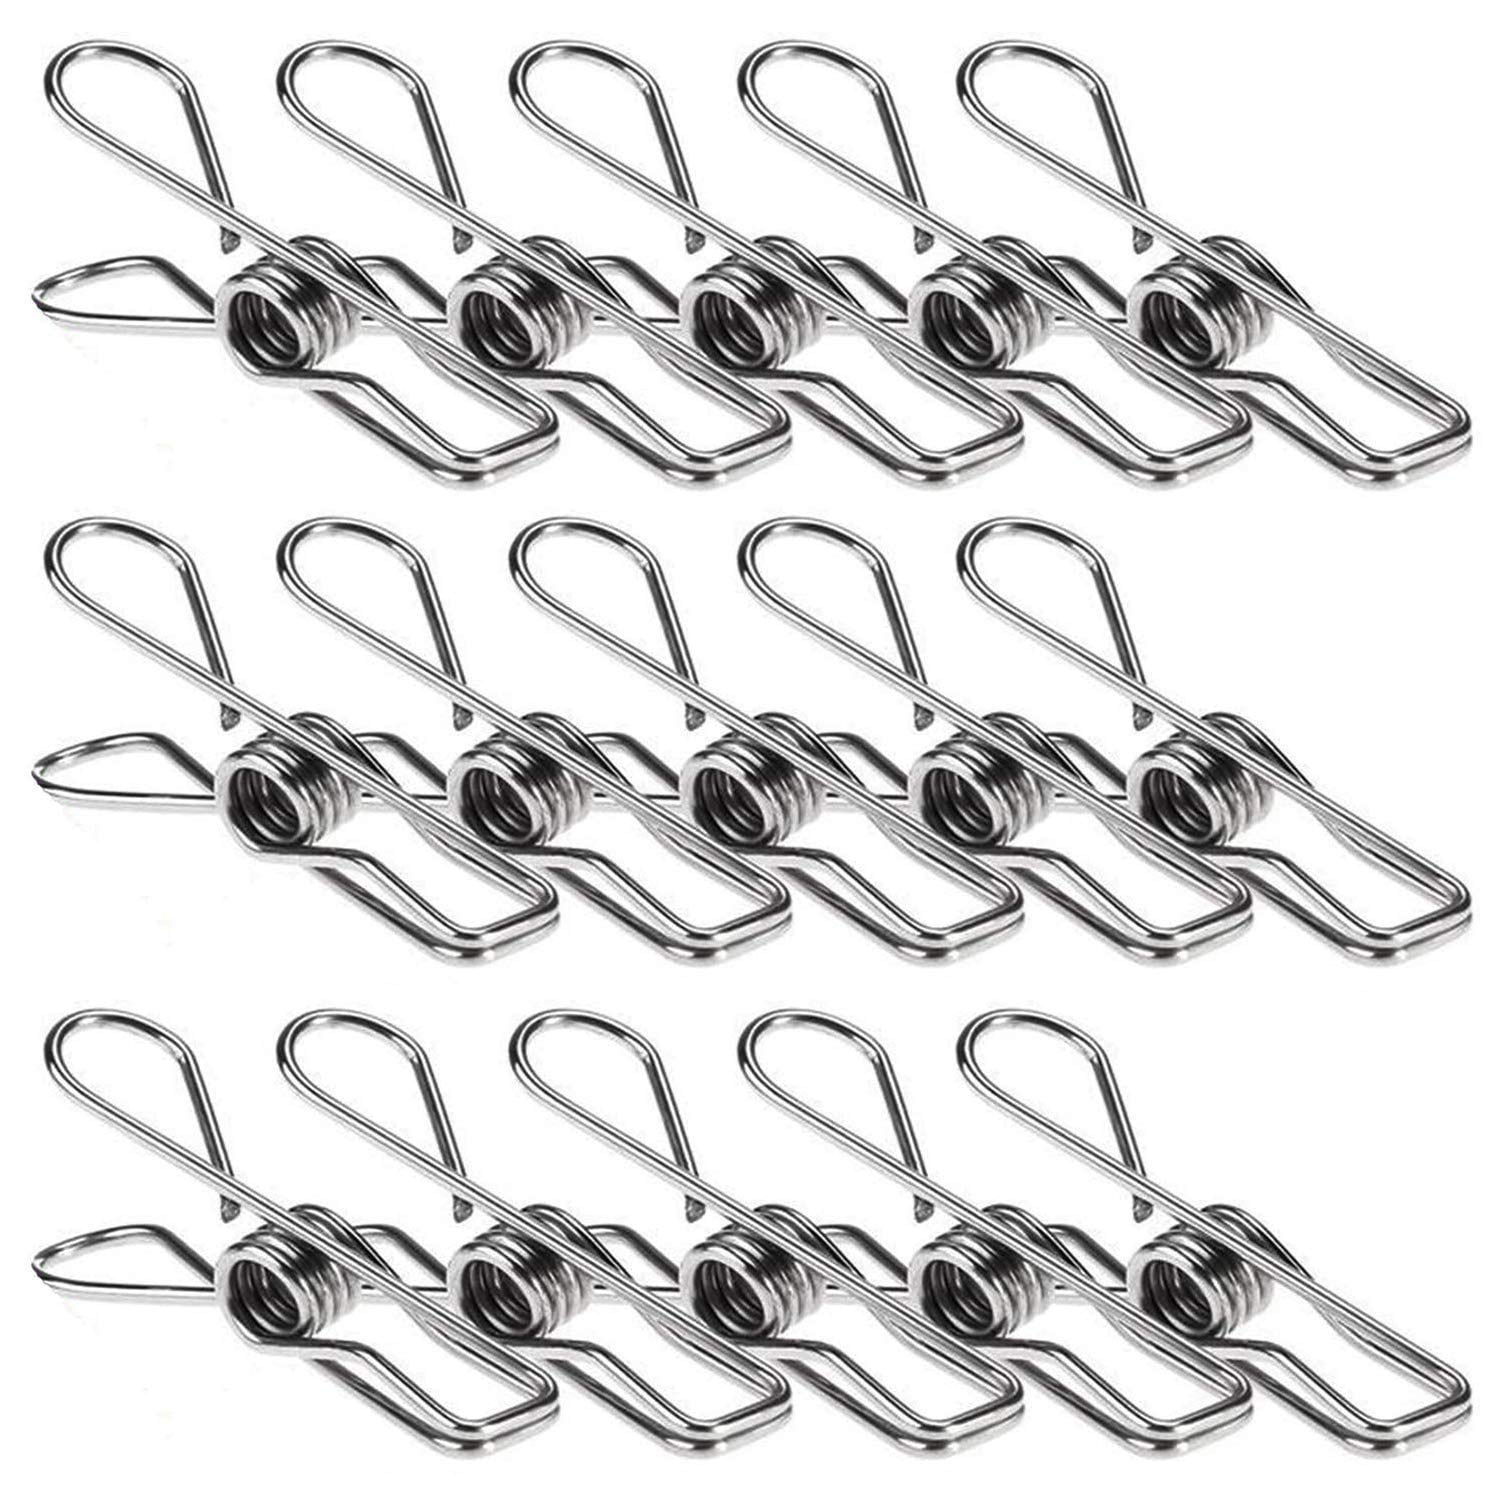 Amerteer 20 Pack Heavy Duty Stainless Steel Wire Clips for Drying